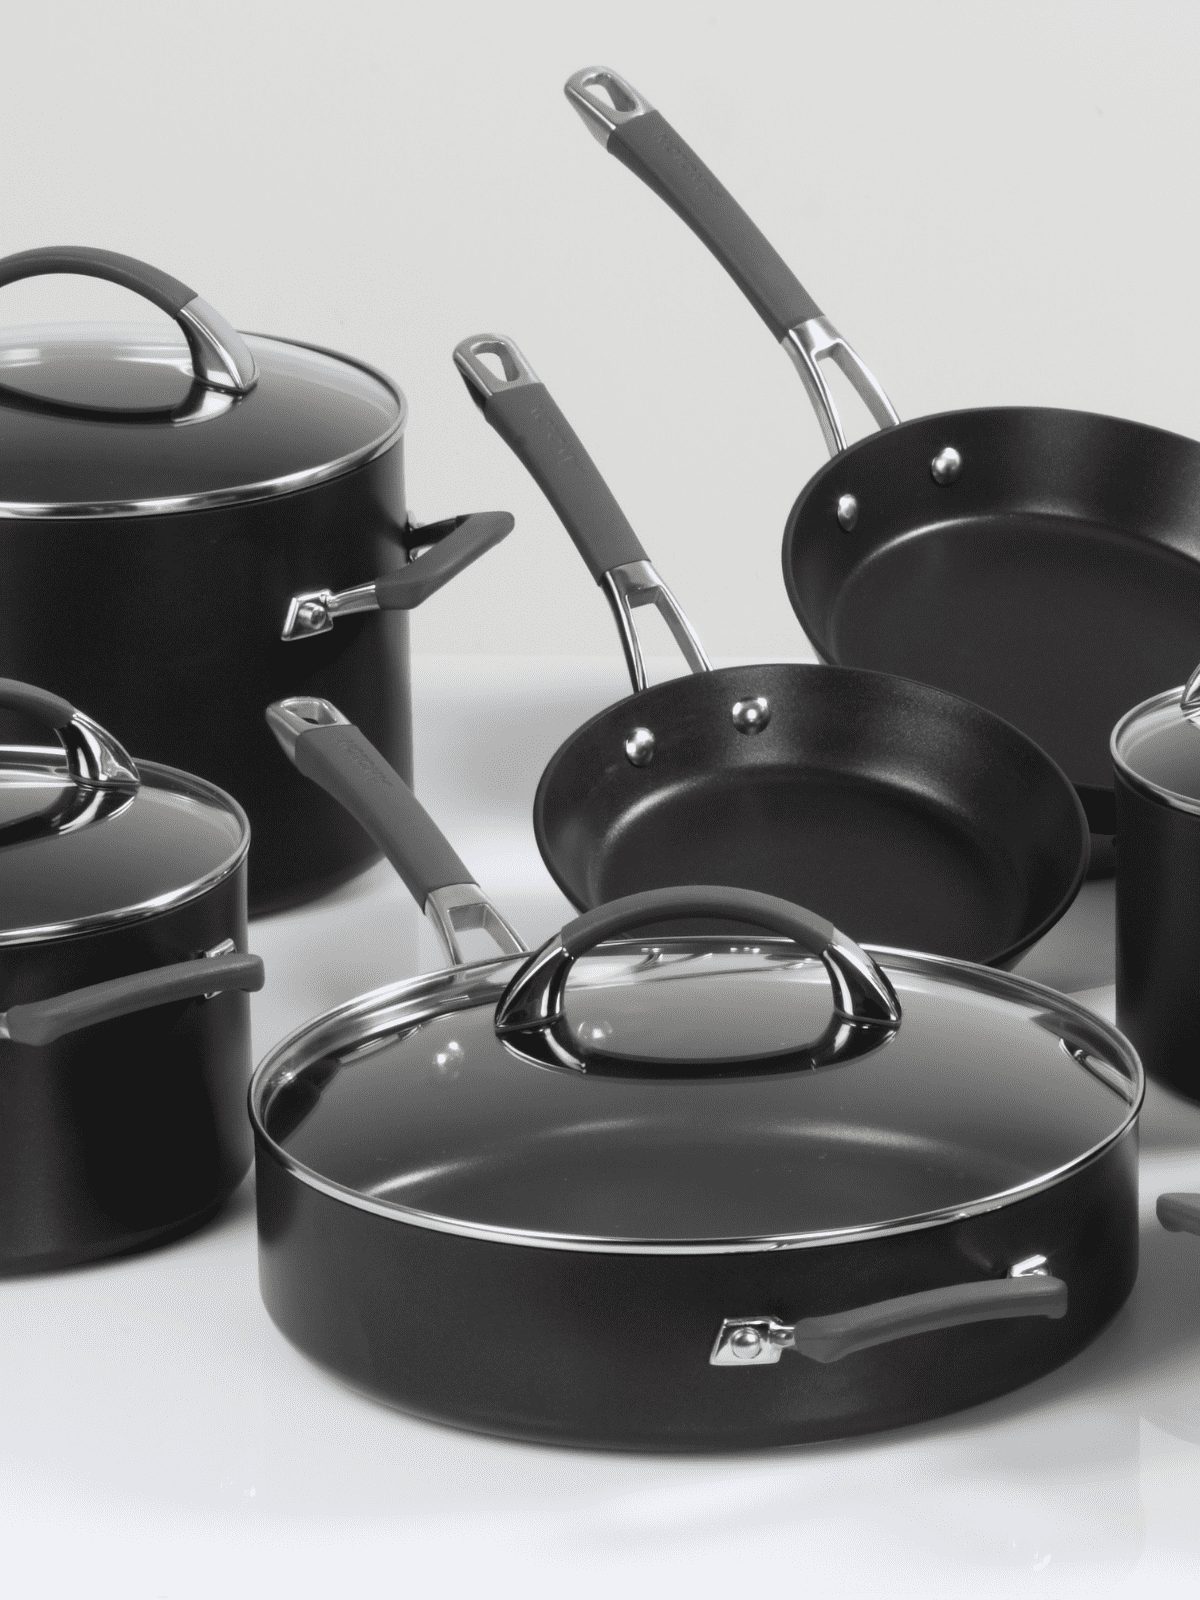 Best cookware sets to buy for coil or glass cooktop.